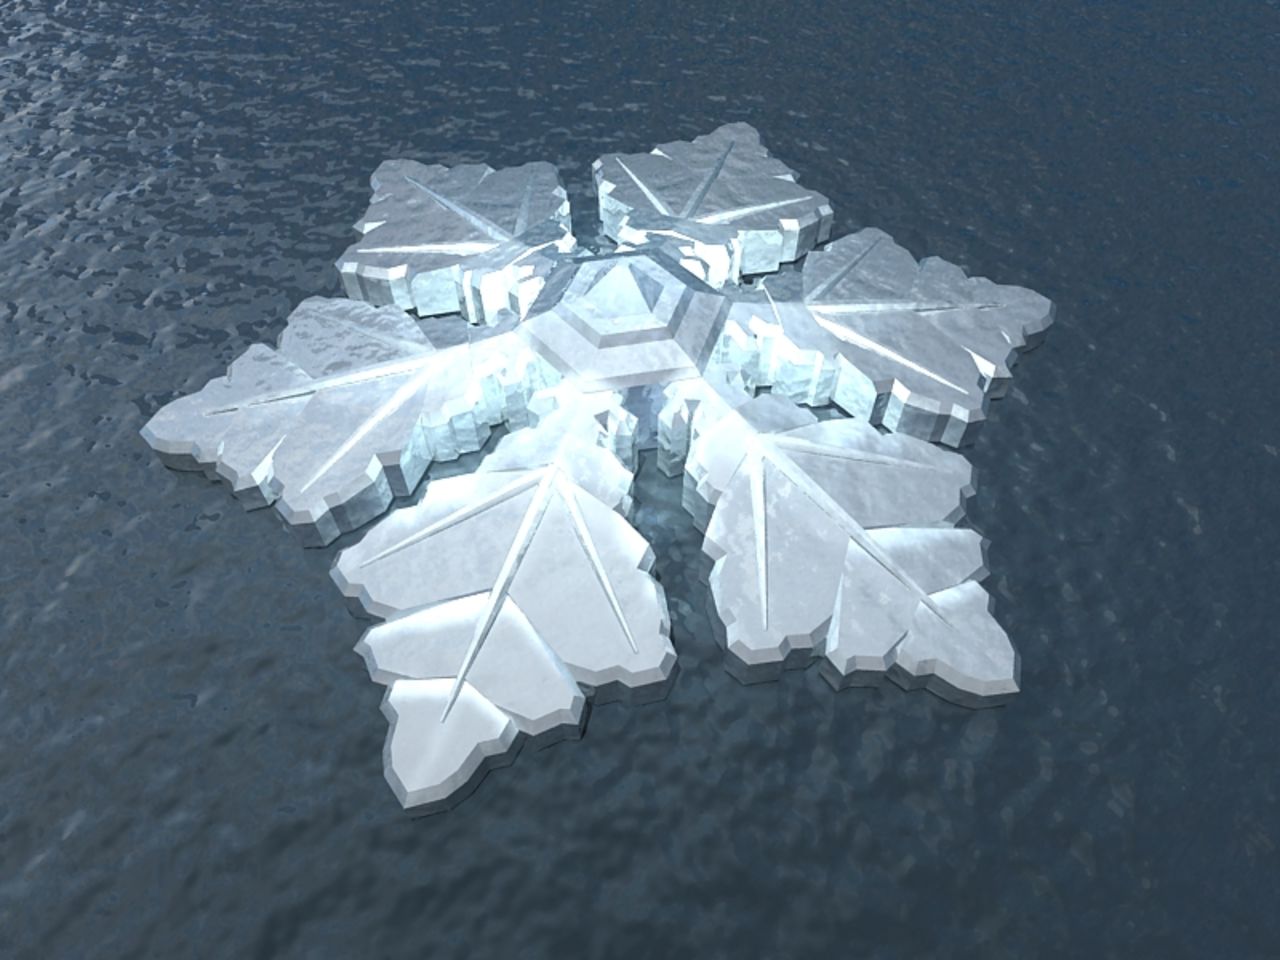 The 86-room Krystall hotel is scheduled to be built off the coast of Tromso, Norway, in 2016.